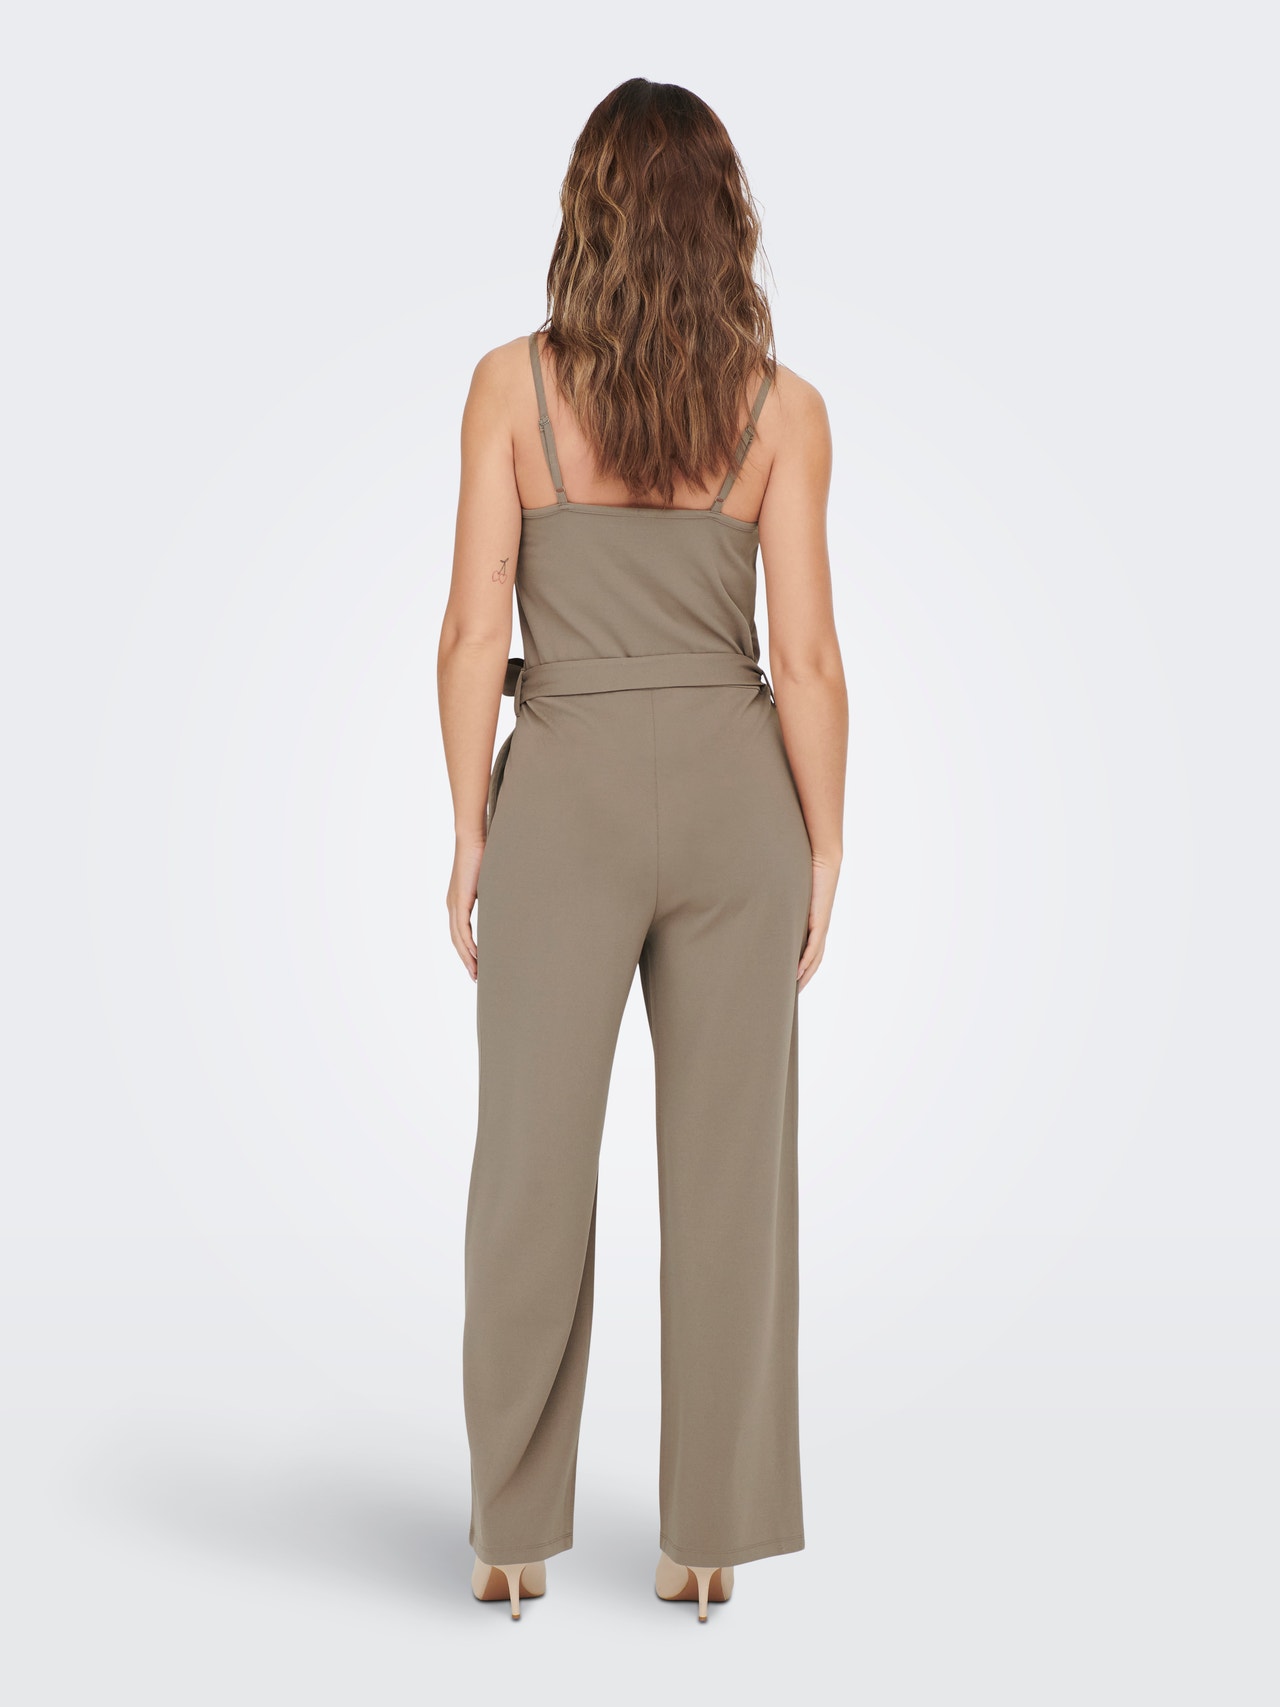 ONLY Jumpsuit With Belt -Driftwood - 15288246